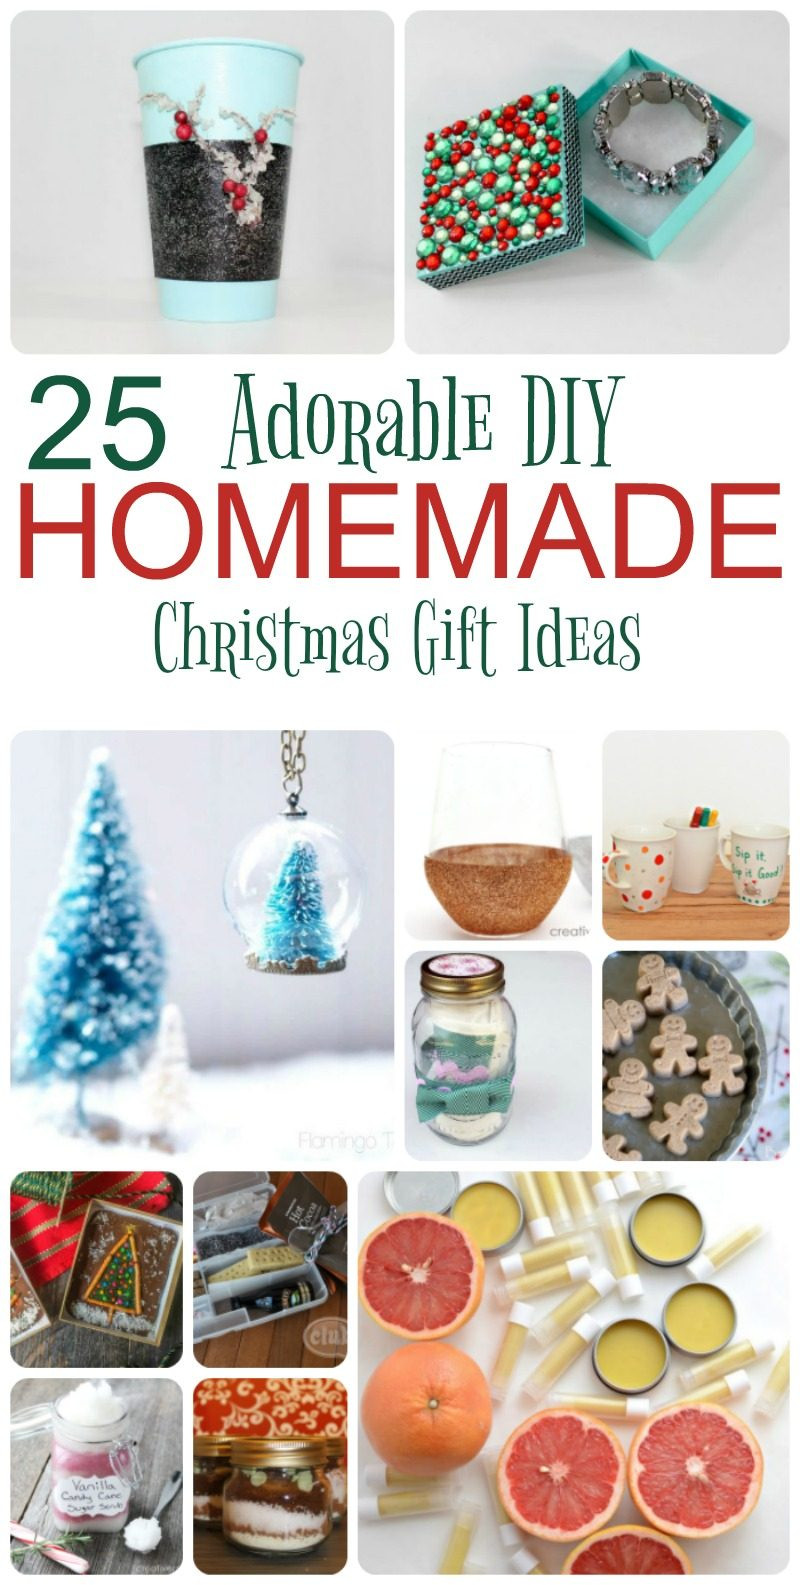 DIY Gifts For Adults
 25 Adorable Homemade Gifts to Make for Christmas Pretty